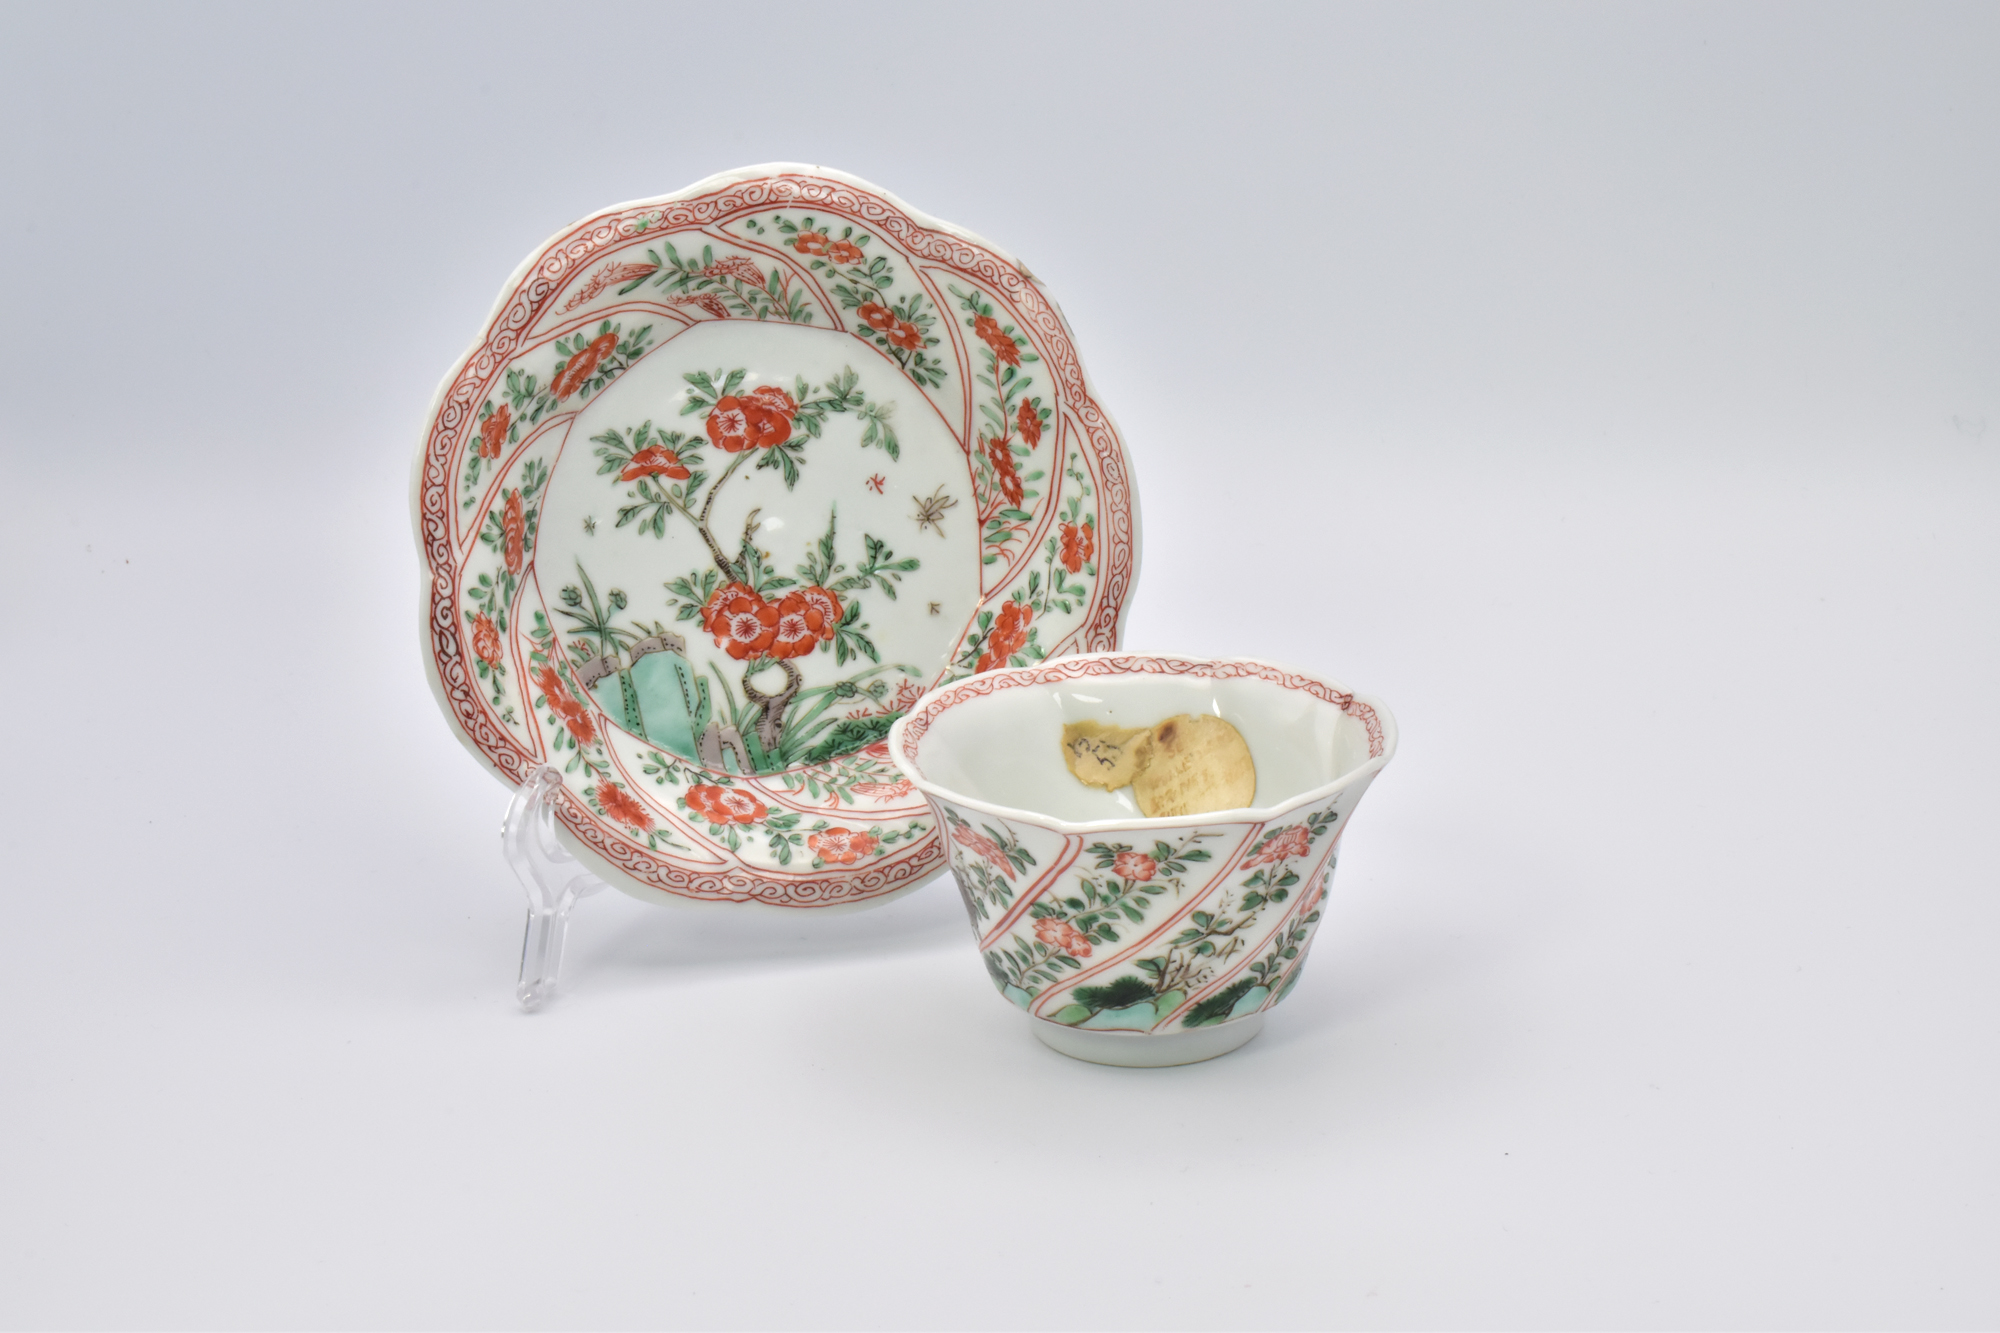 A CHINESE 'FAMILLE-VERTE' PORCELAIN CUP AND SAUCER, QING DYNASTY, KANGXI PERIOD, 1662 - 1722